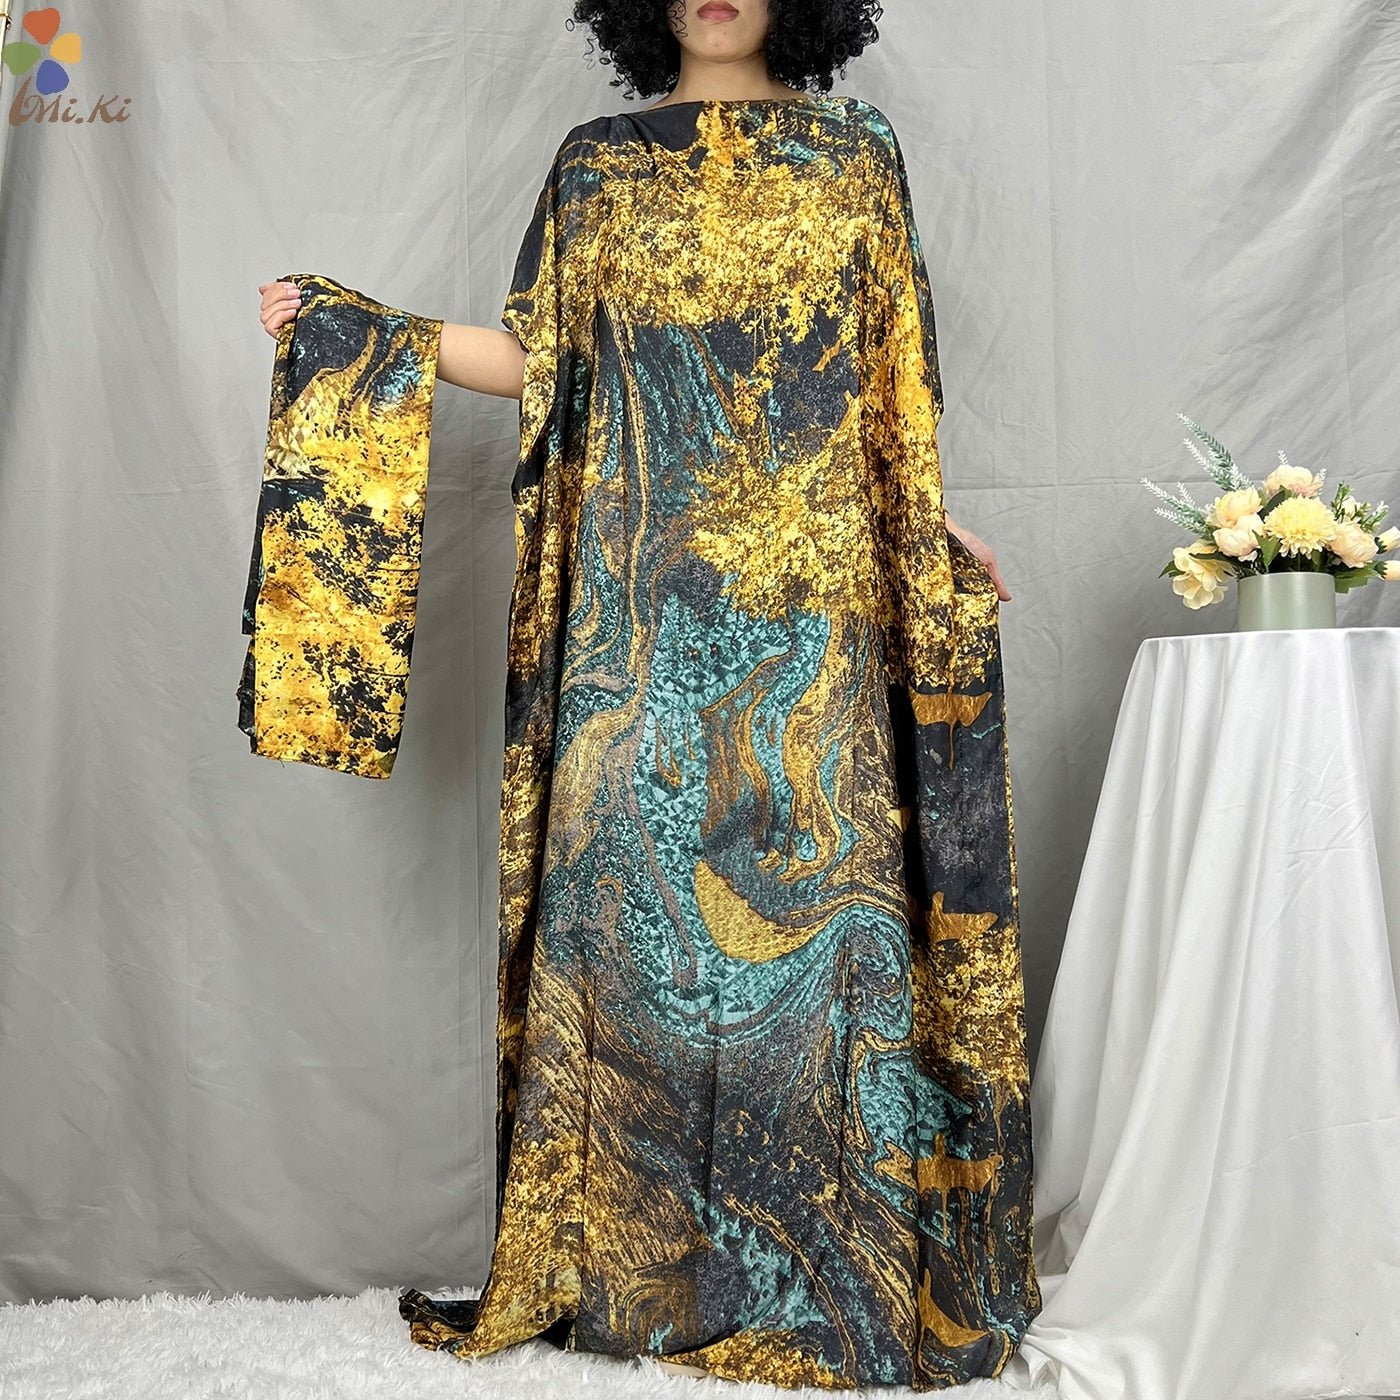 2PC Set of Fashionable Dashiki Robes - Printed Loose Dresses with Luxurious Silk Fabric for Women - Flexi Africa